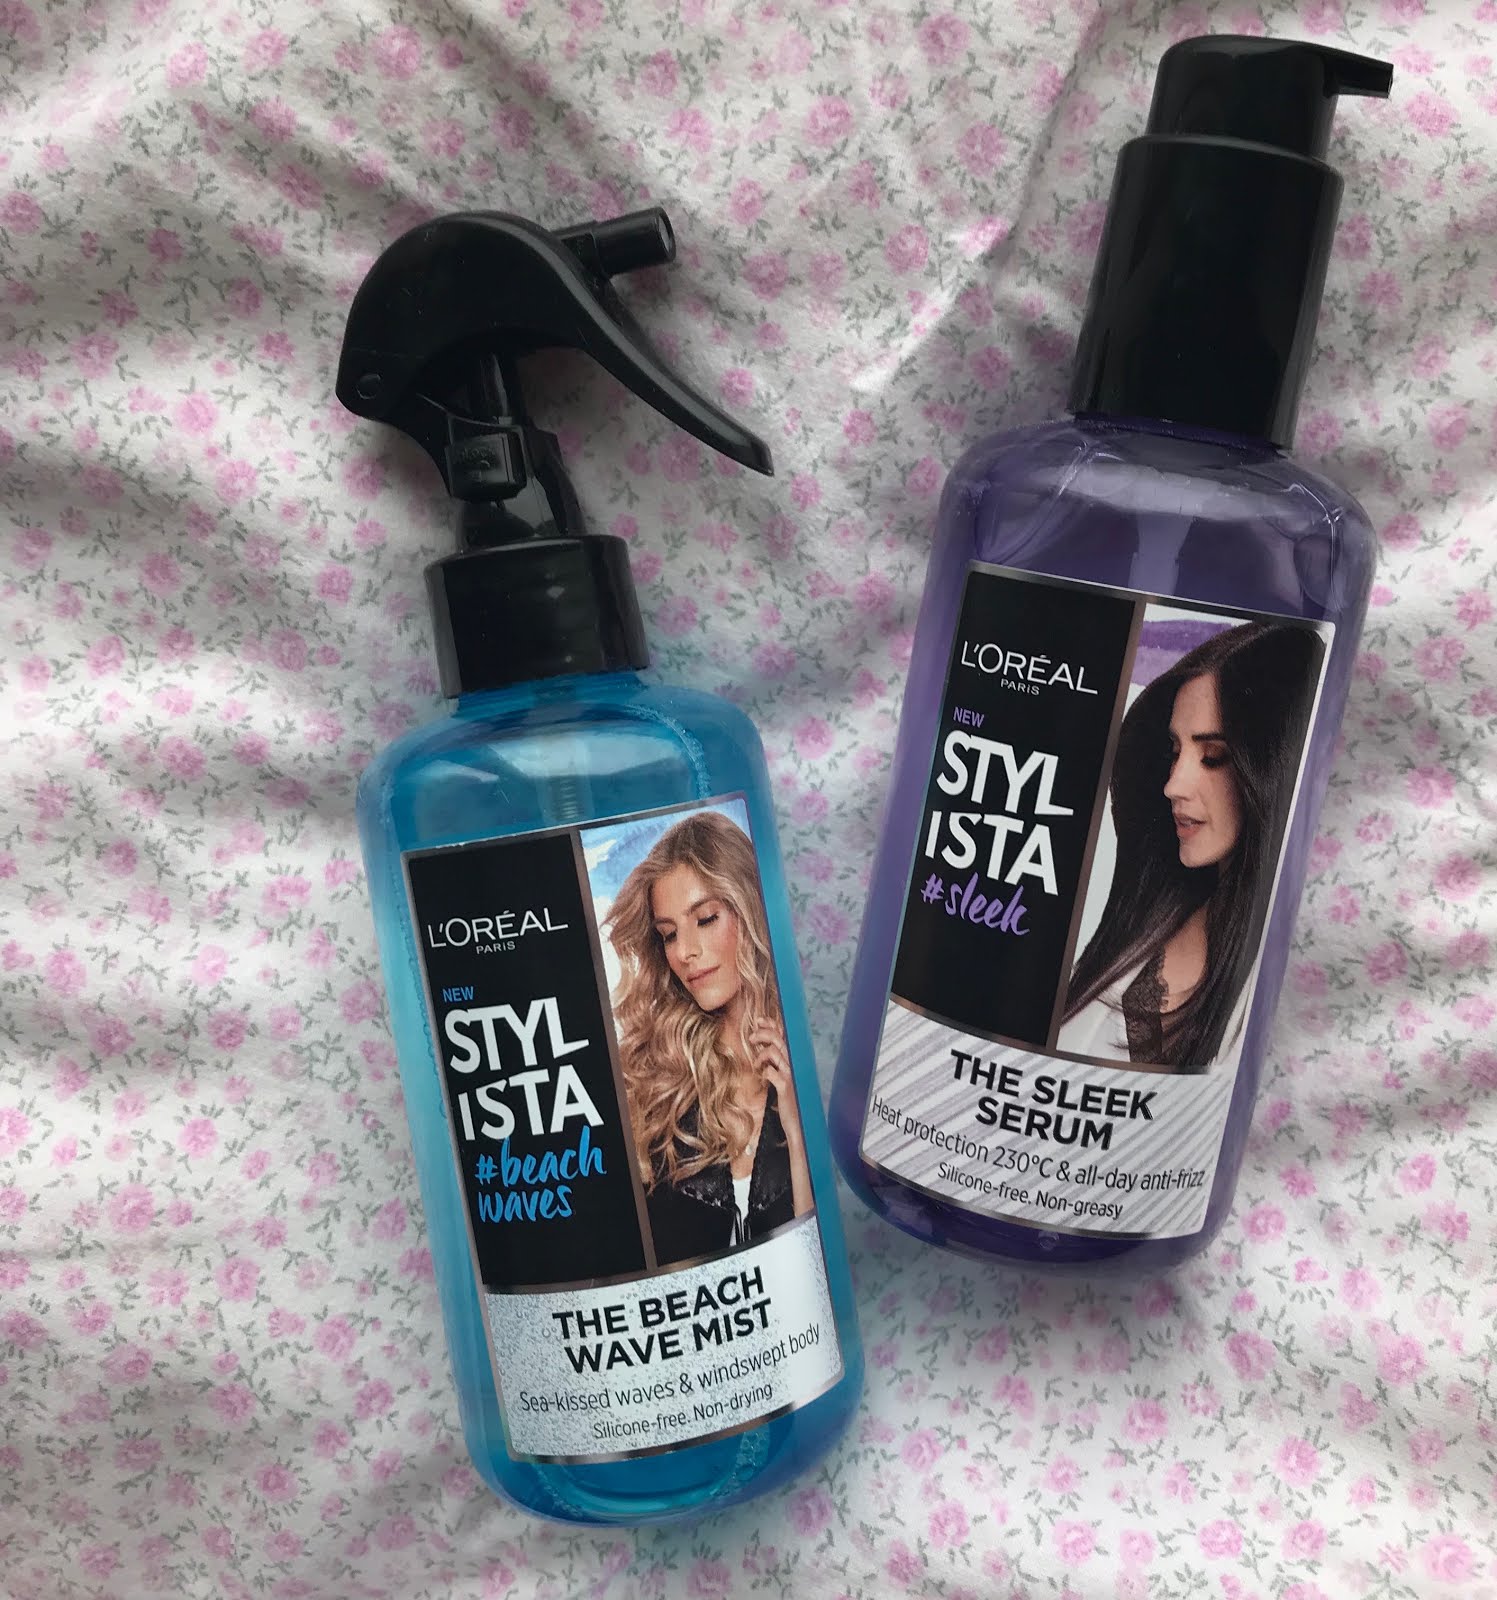 The [not so] girly girl: Review | L'OREAL STYLISTA #sleek & #beachwaves